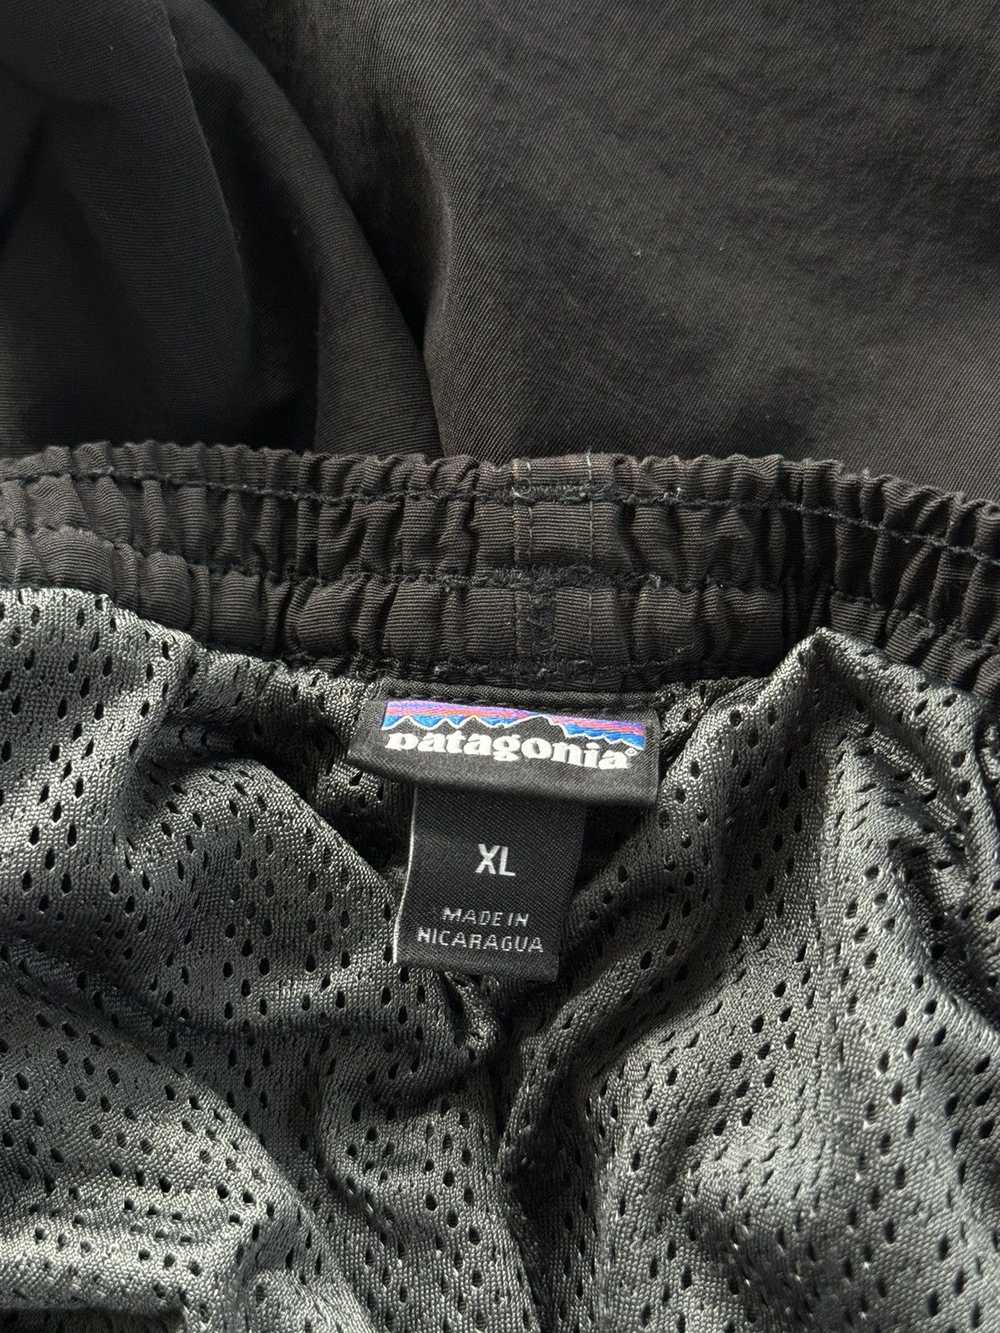 Patagonia 5” Baggie Shorts with Nets Black XL - image 5